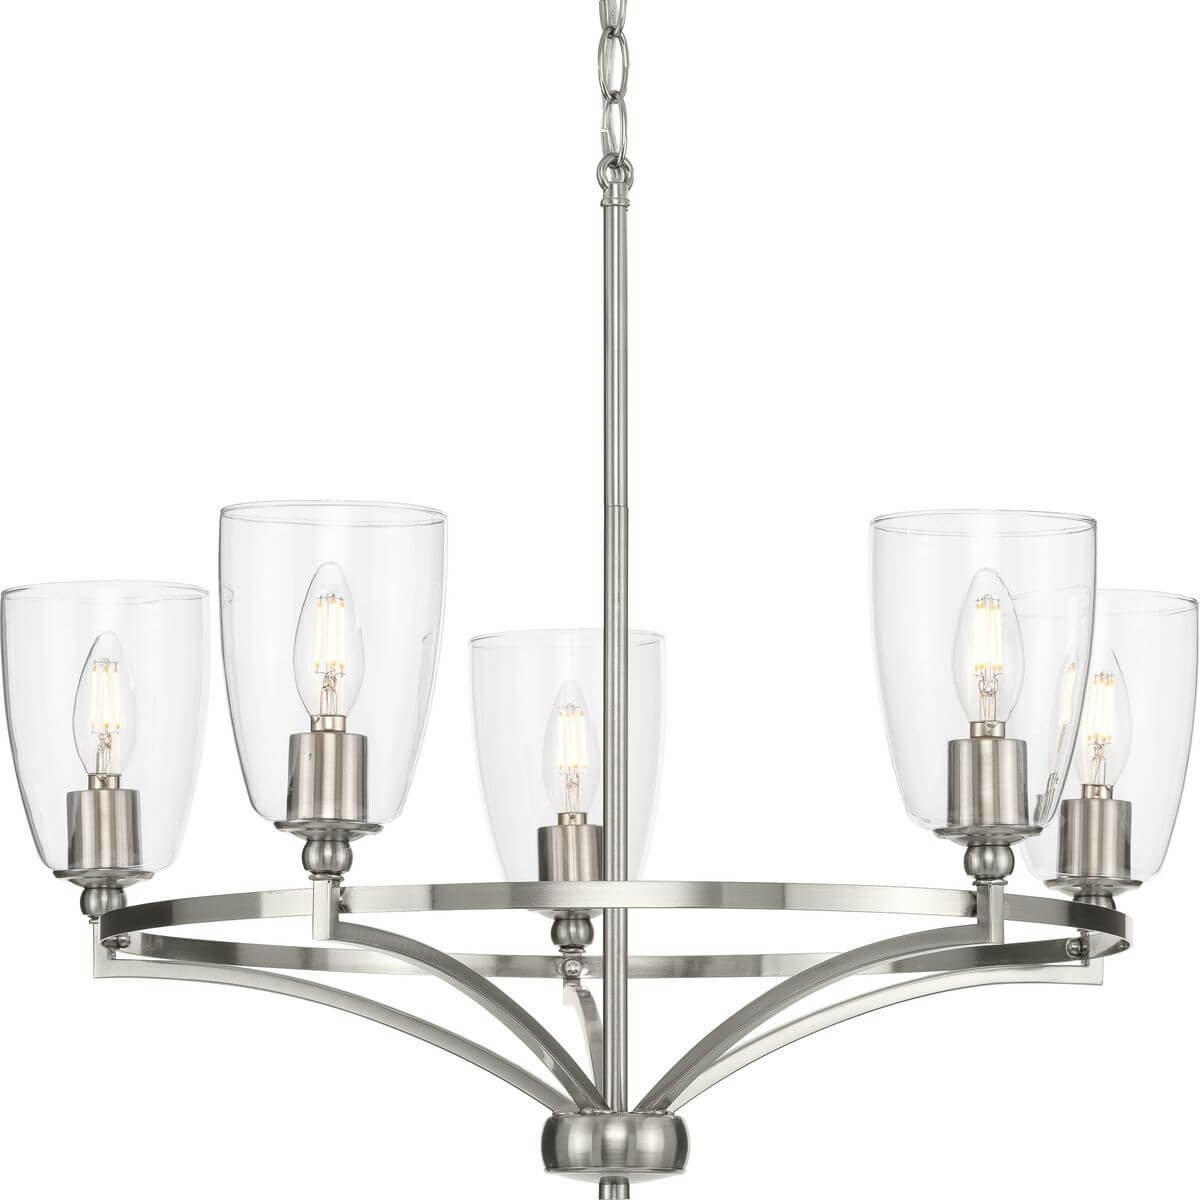 Progress Lighting Parkhurst 5 Light 25 inch Chandelier in Brushed Nickel with Clear Glass P400296-009